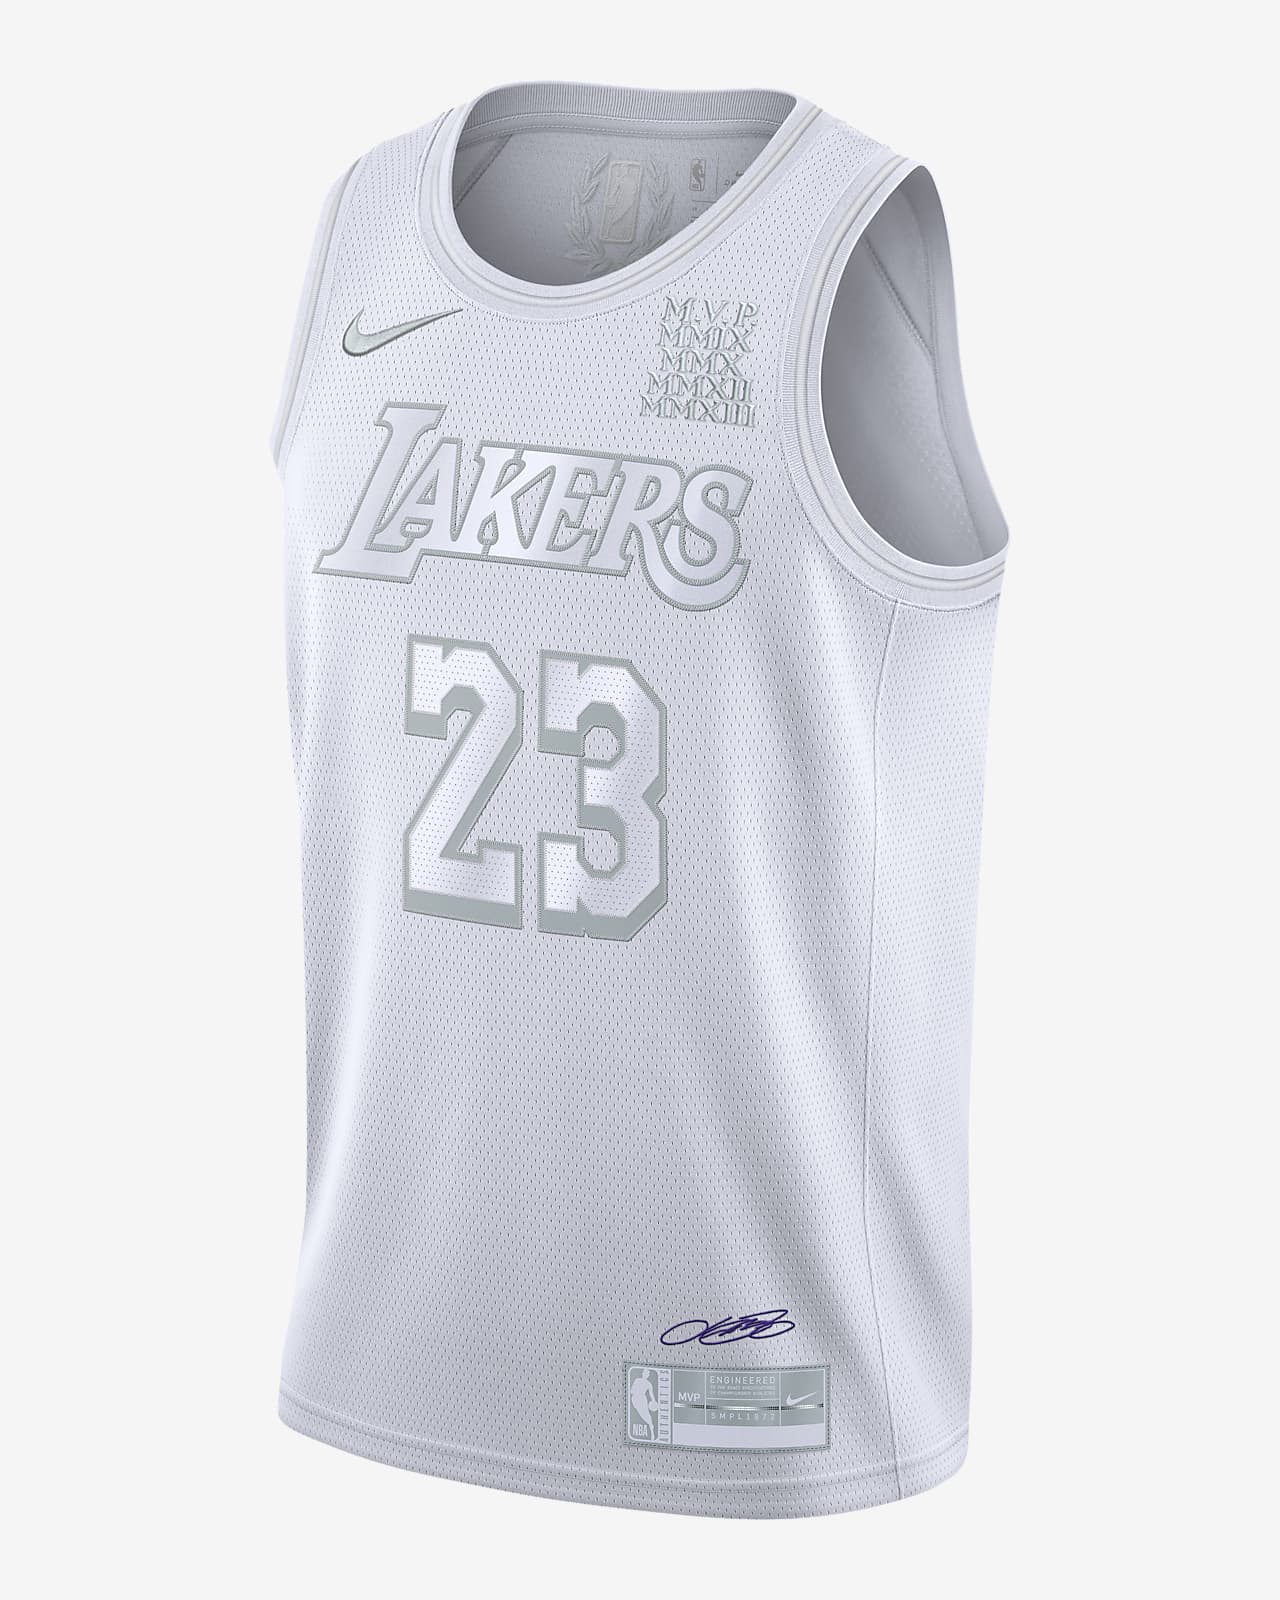 lebron james black and white jersey